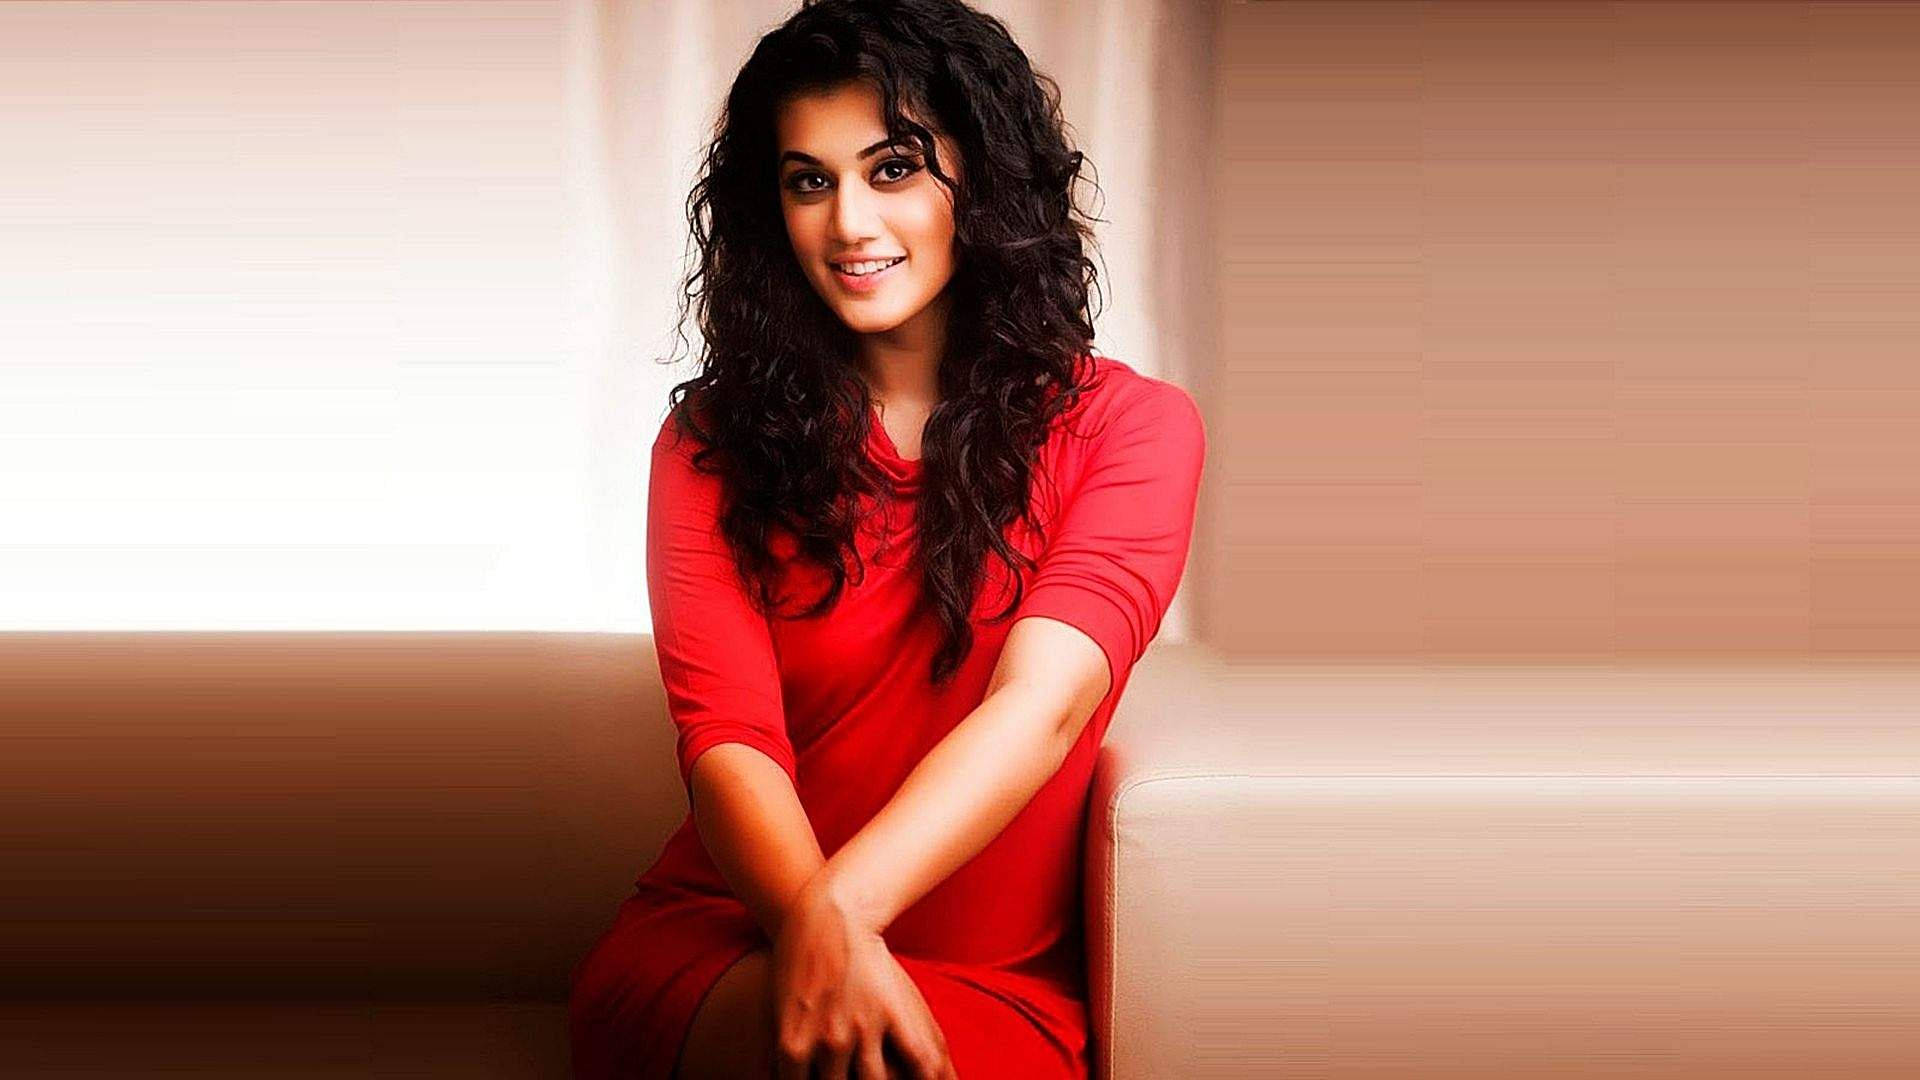 Taapsee Pannu In Red Dress Wallpaper